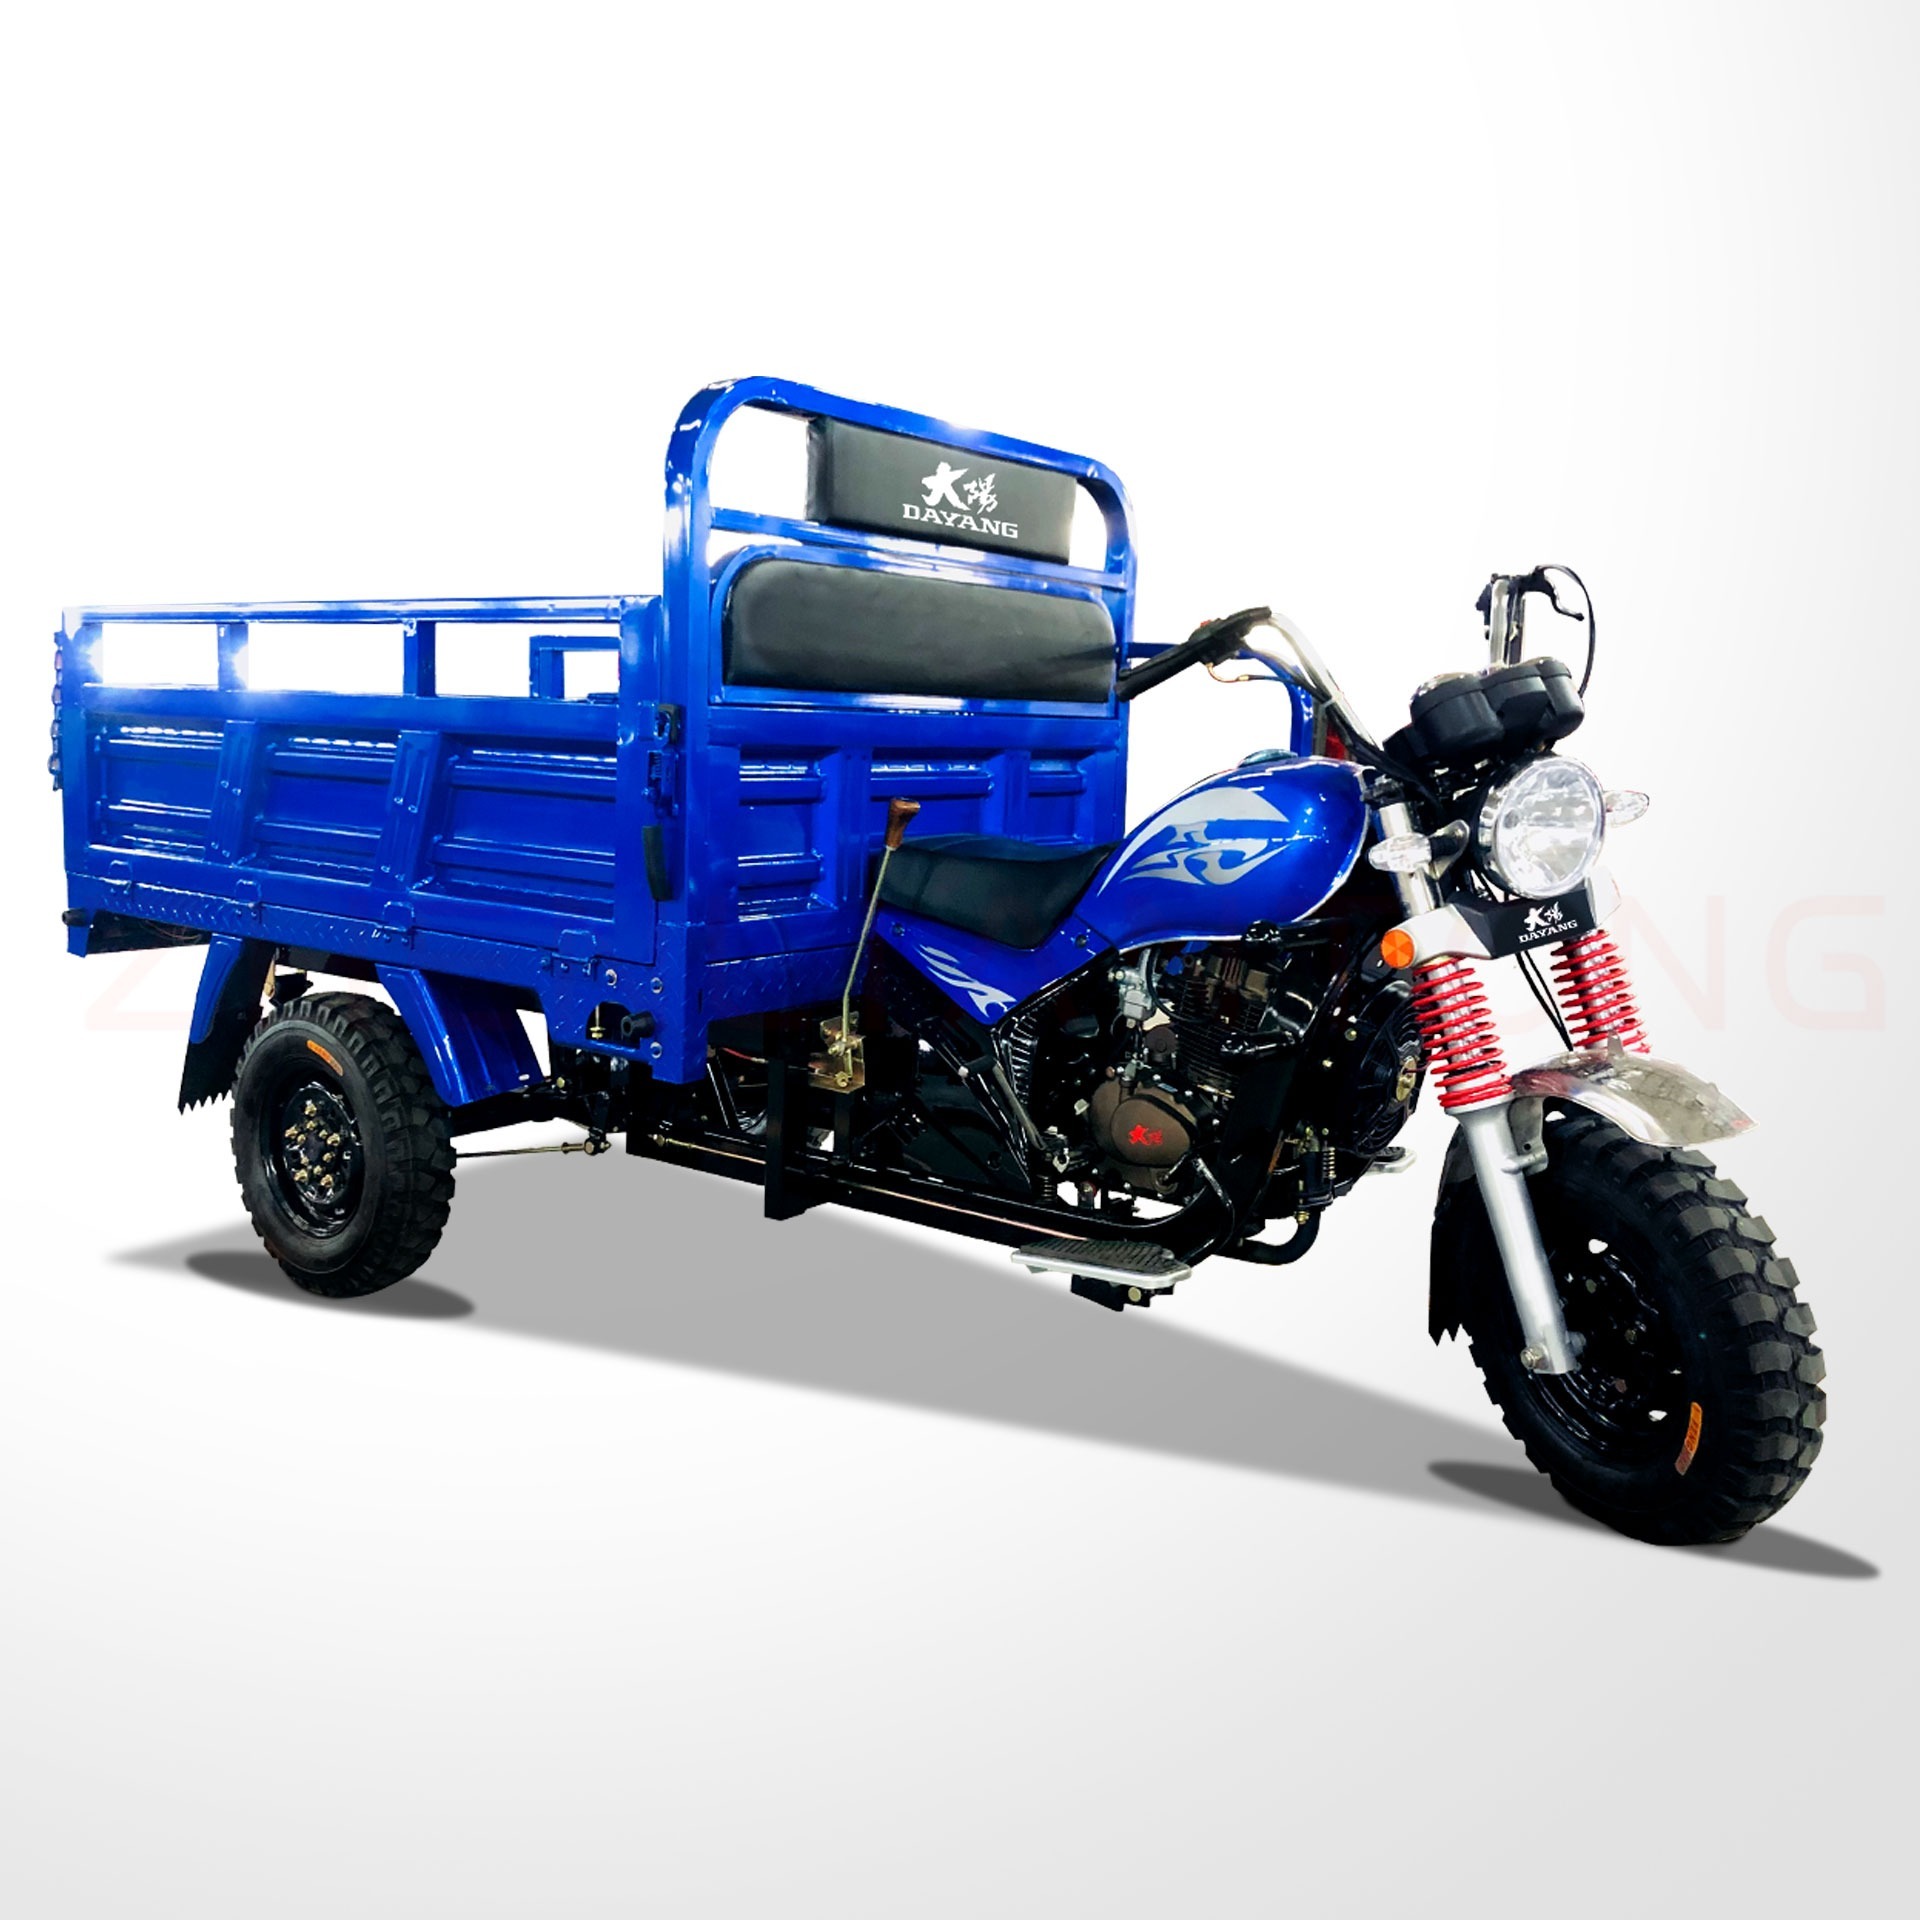 DB-5 China hot selling cargo tricycle models with 175cc engine